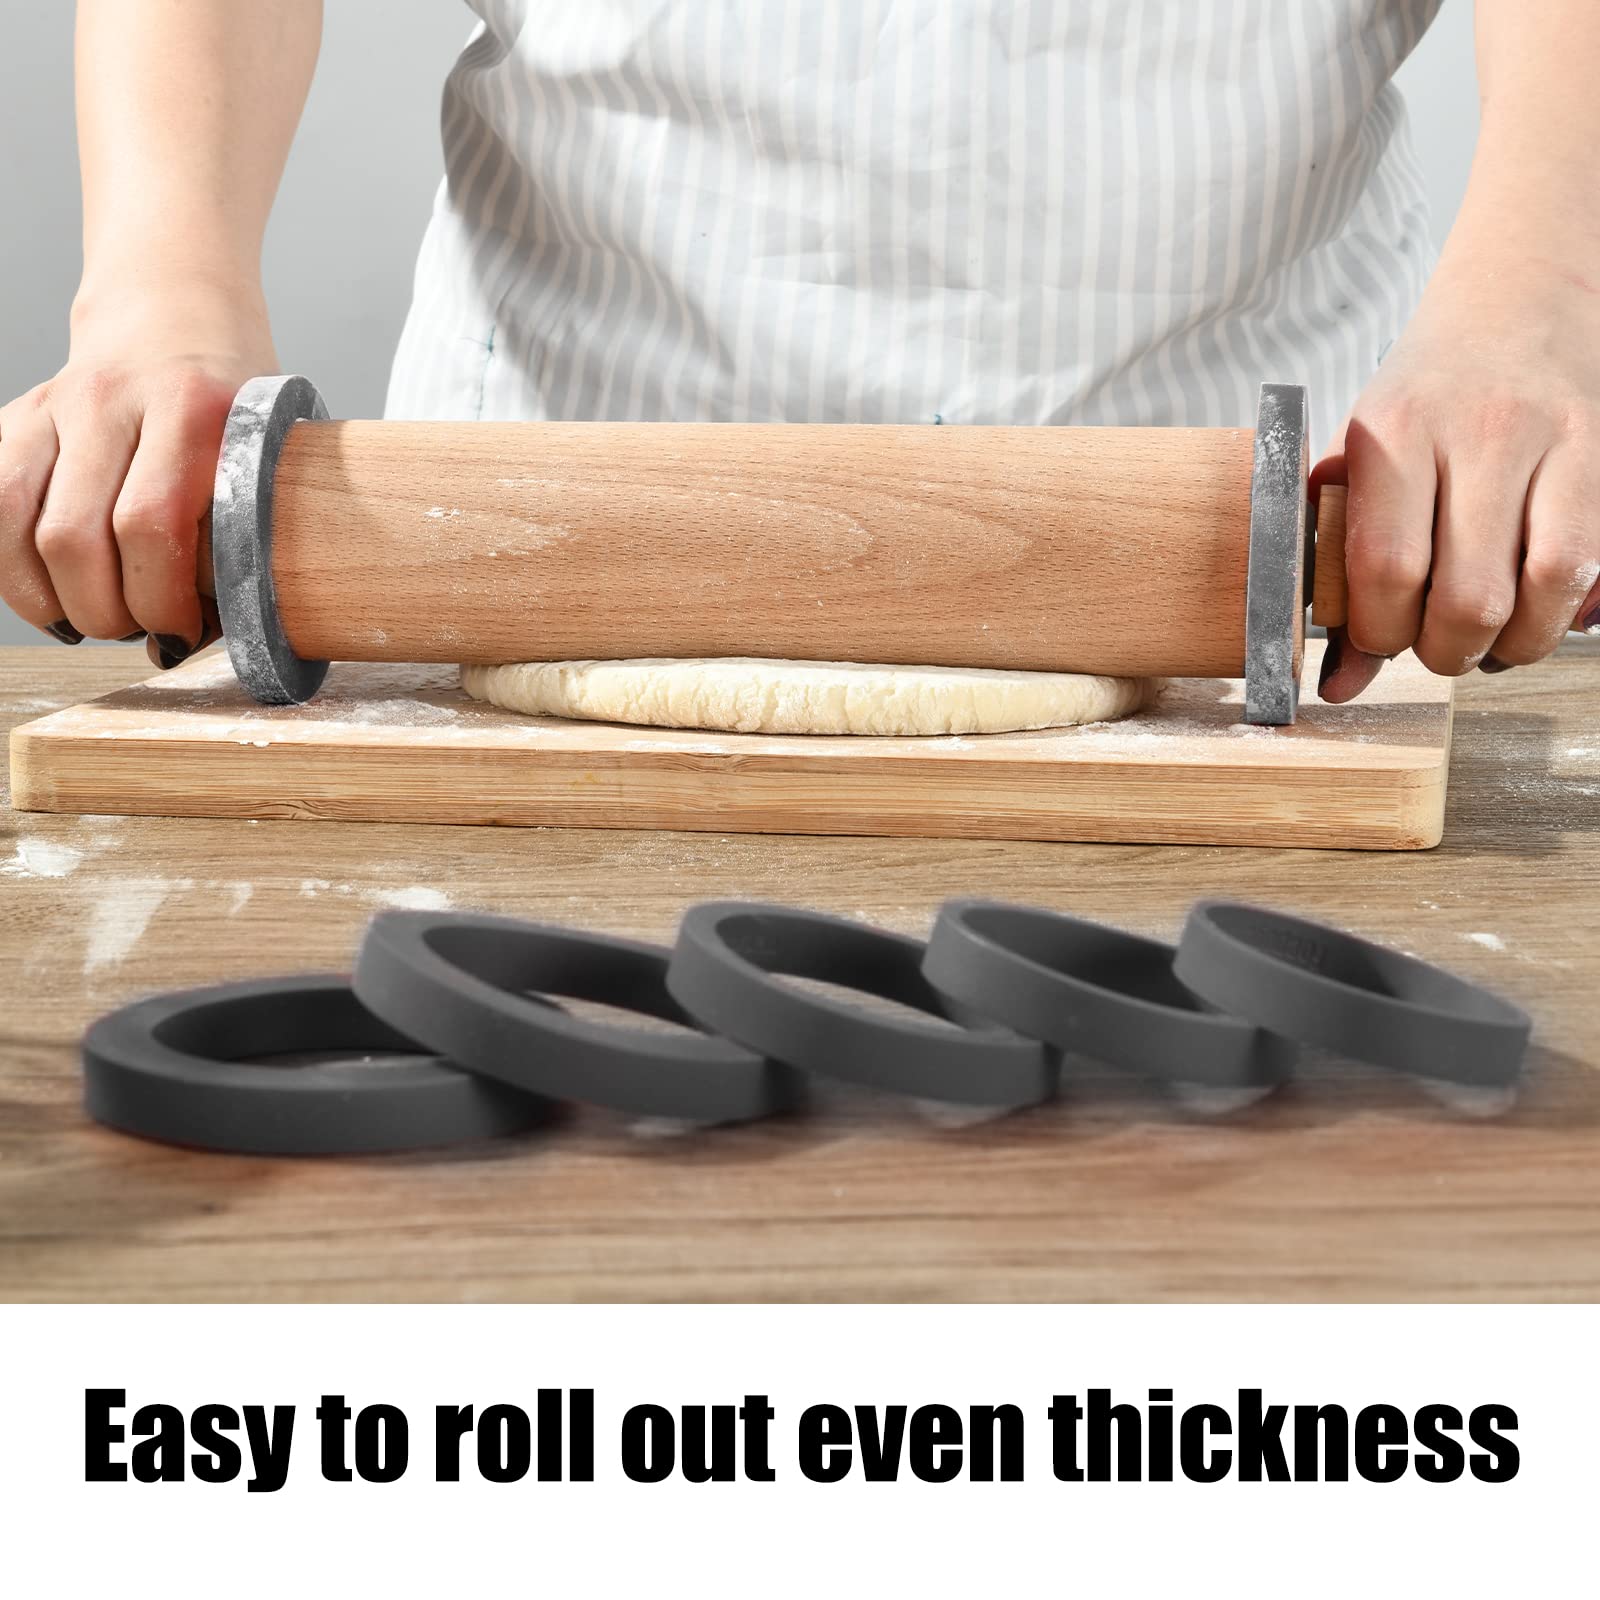 Silicone Rolling Pin Rings for Dough Thickness (10 Pieces Set), Silicon Guide Rings for Rolling Pin, Flexible Adjustable Thickness Spacer Bands Fit 2.2-2.44 Inch(56-62MM) Wide Roller by Foepoge(Gray)